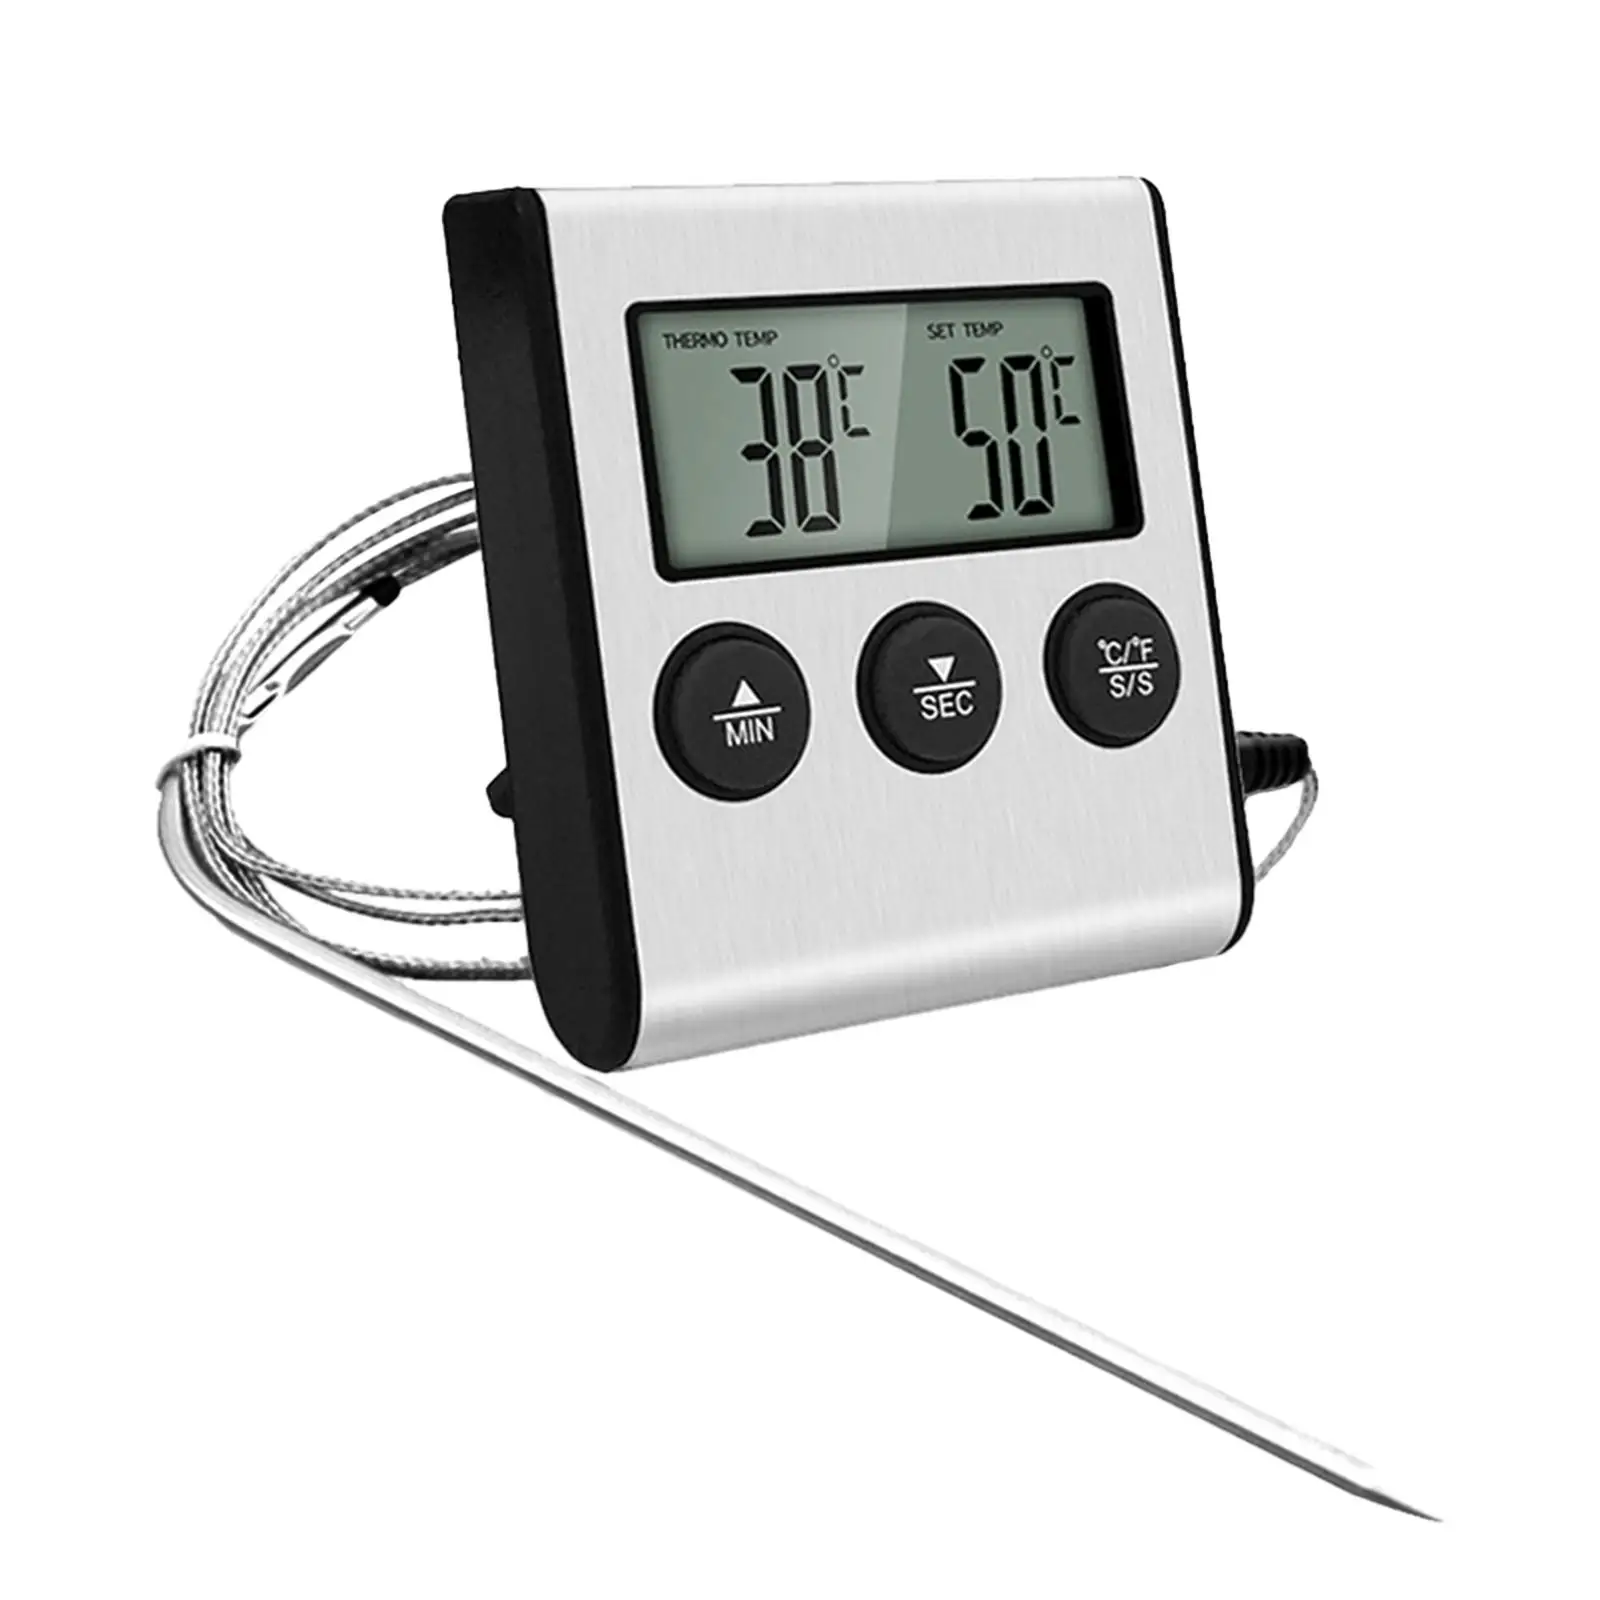 

Food Thermometer Long Probe Accurate Fast Celsius/Fahrenheit Instant Read Meat Thermometers for BBQ Frying Oven Baking Kitchen